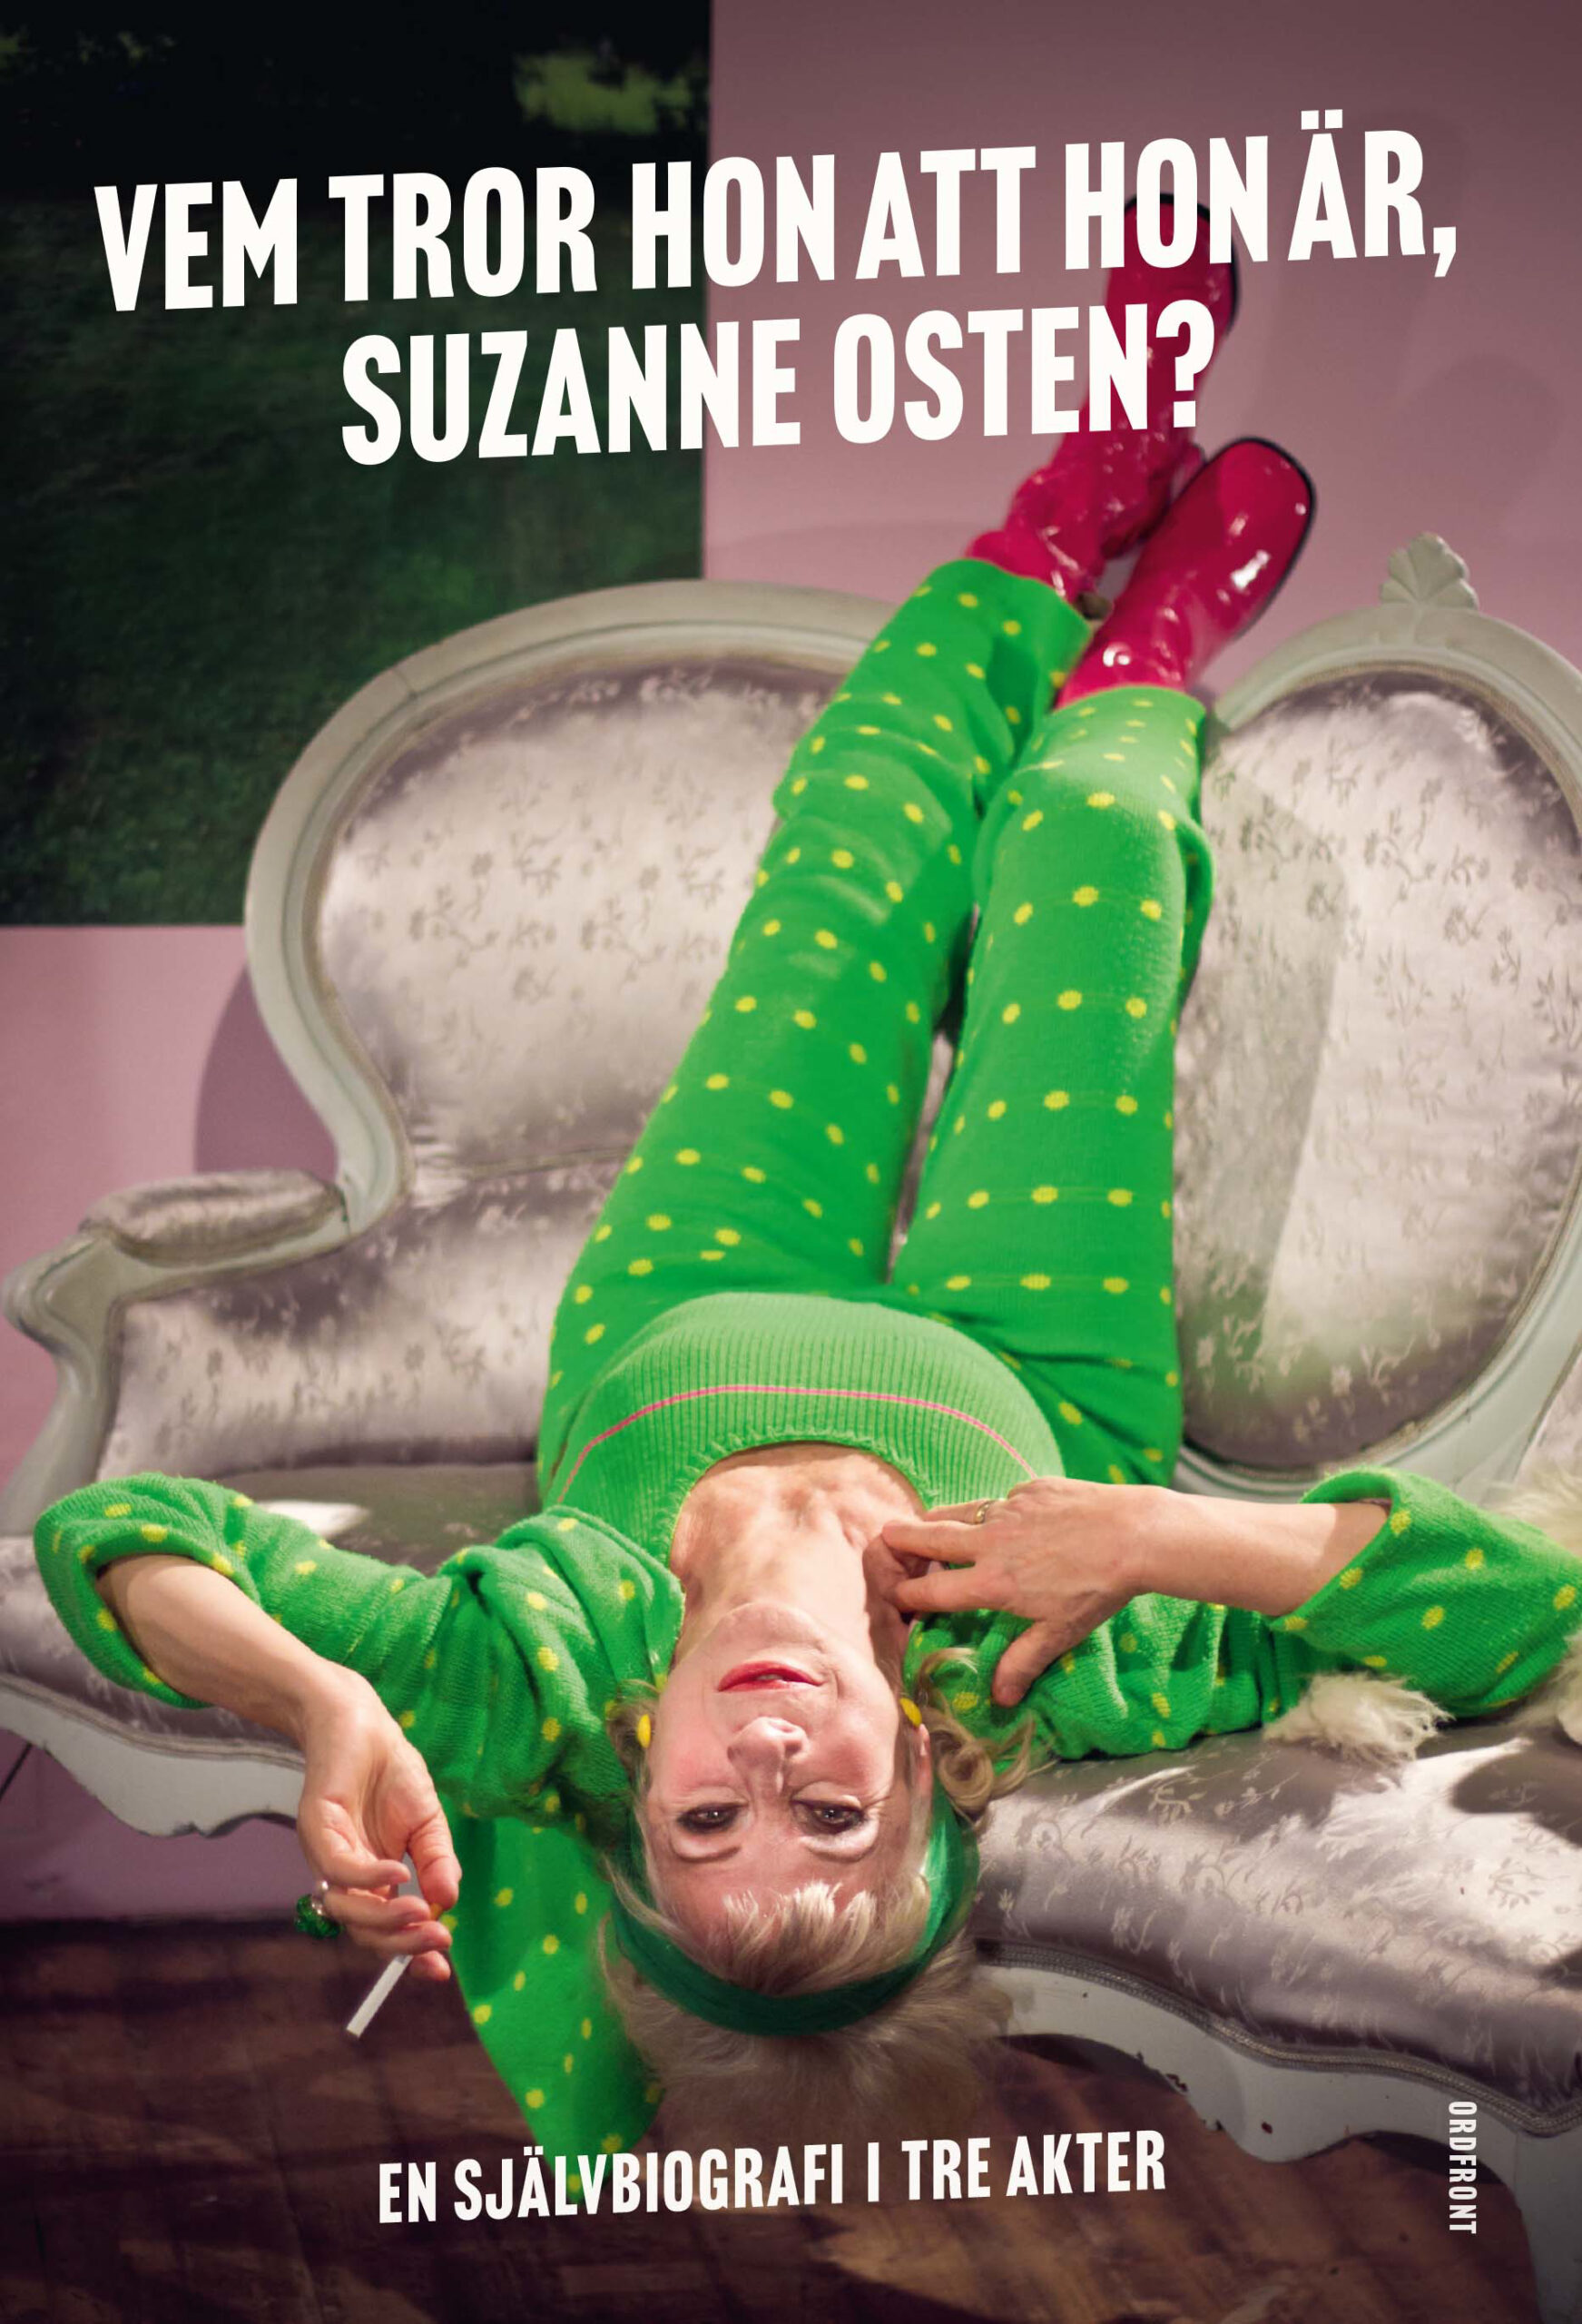 Book cover of "Vem tror hon att hon är": it's a photo of a women lies upside down on a couch wearing a green sweatsuit with green dots, smoking a cigarette.